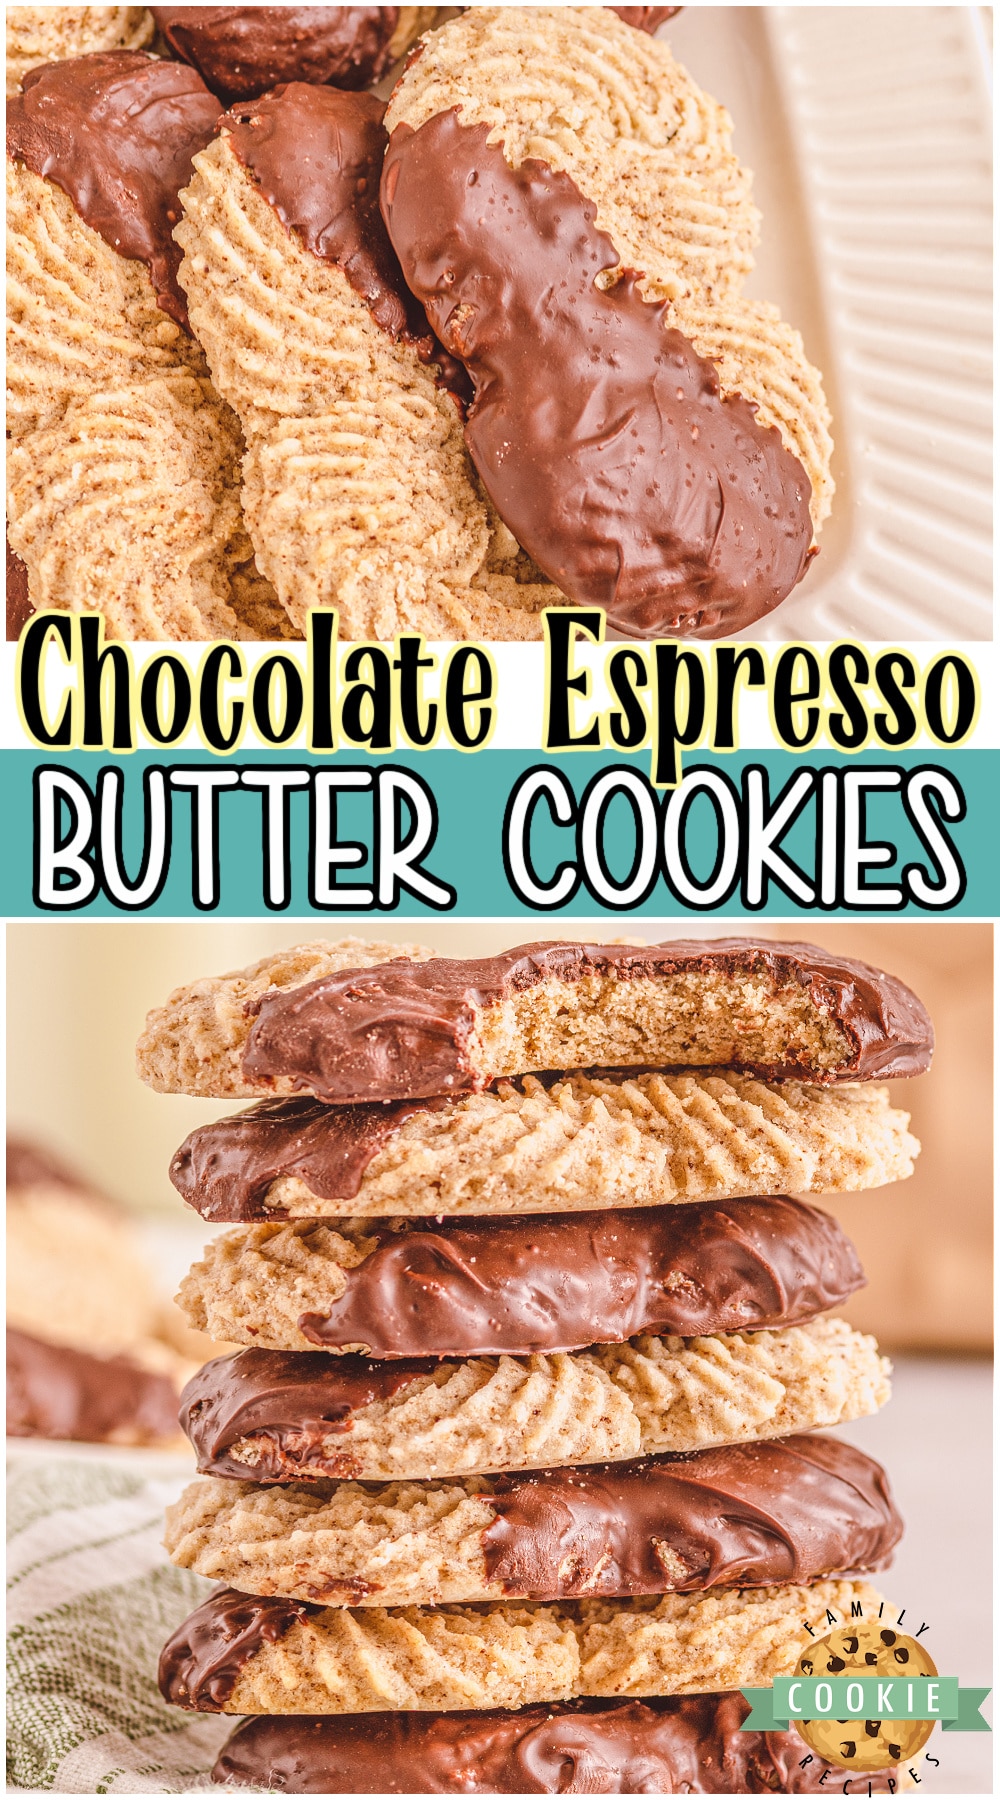 Espresso butter cookies are buttery tender cookies spiked with espresso powder & dipped in chocolate! Fantastic flavor in these gorgeous cookies perfect for Christmas trays! 